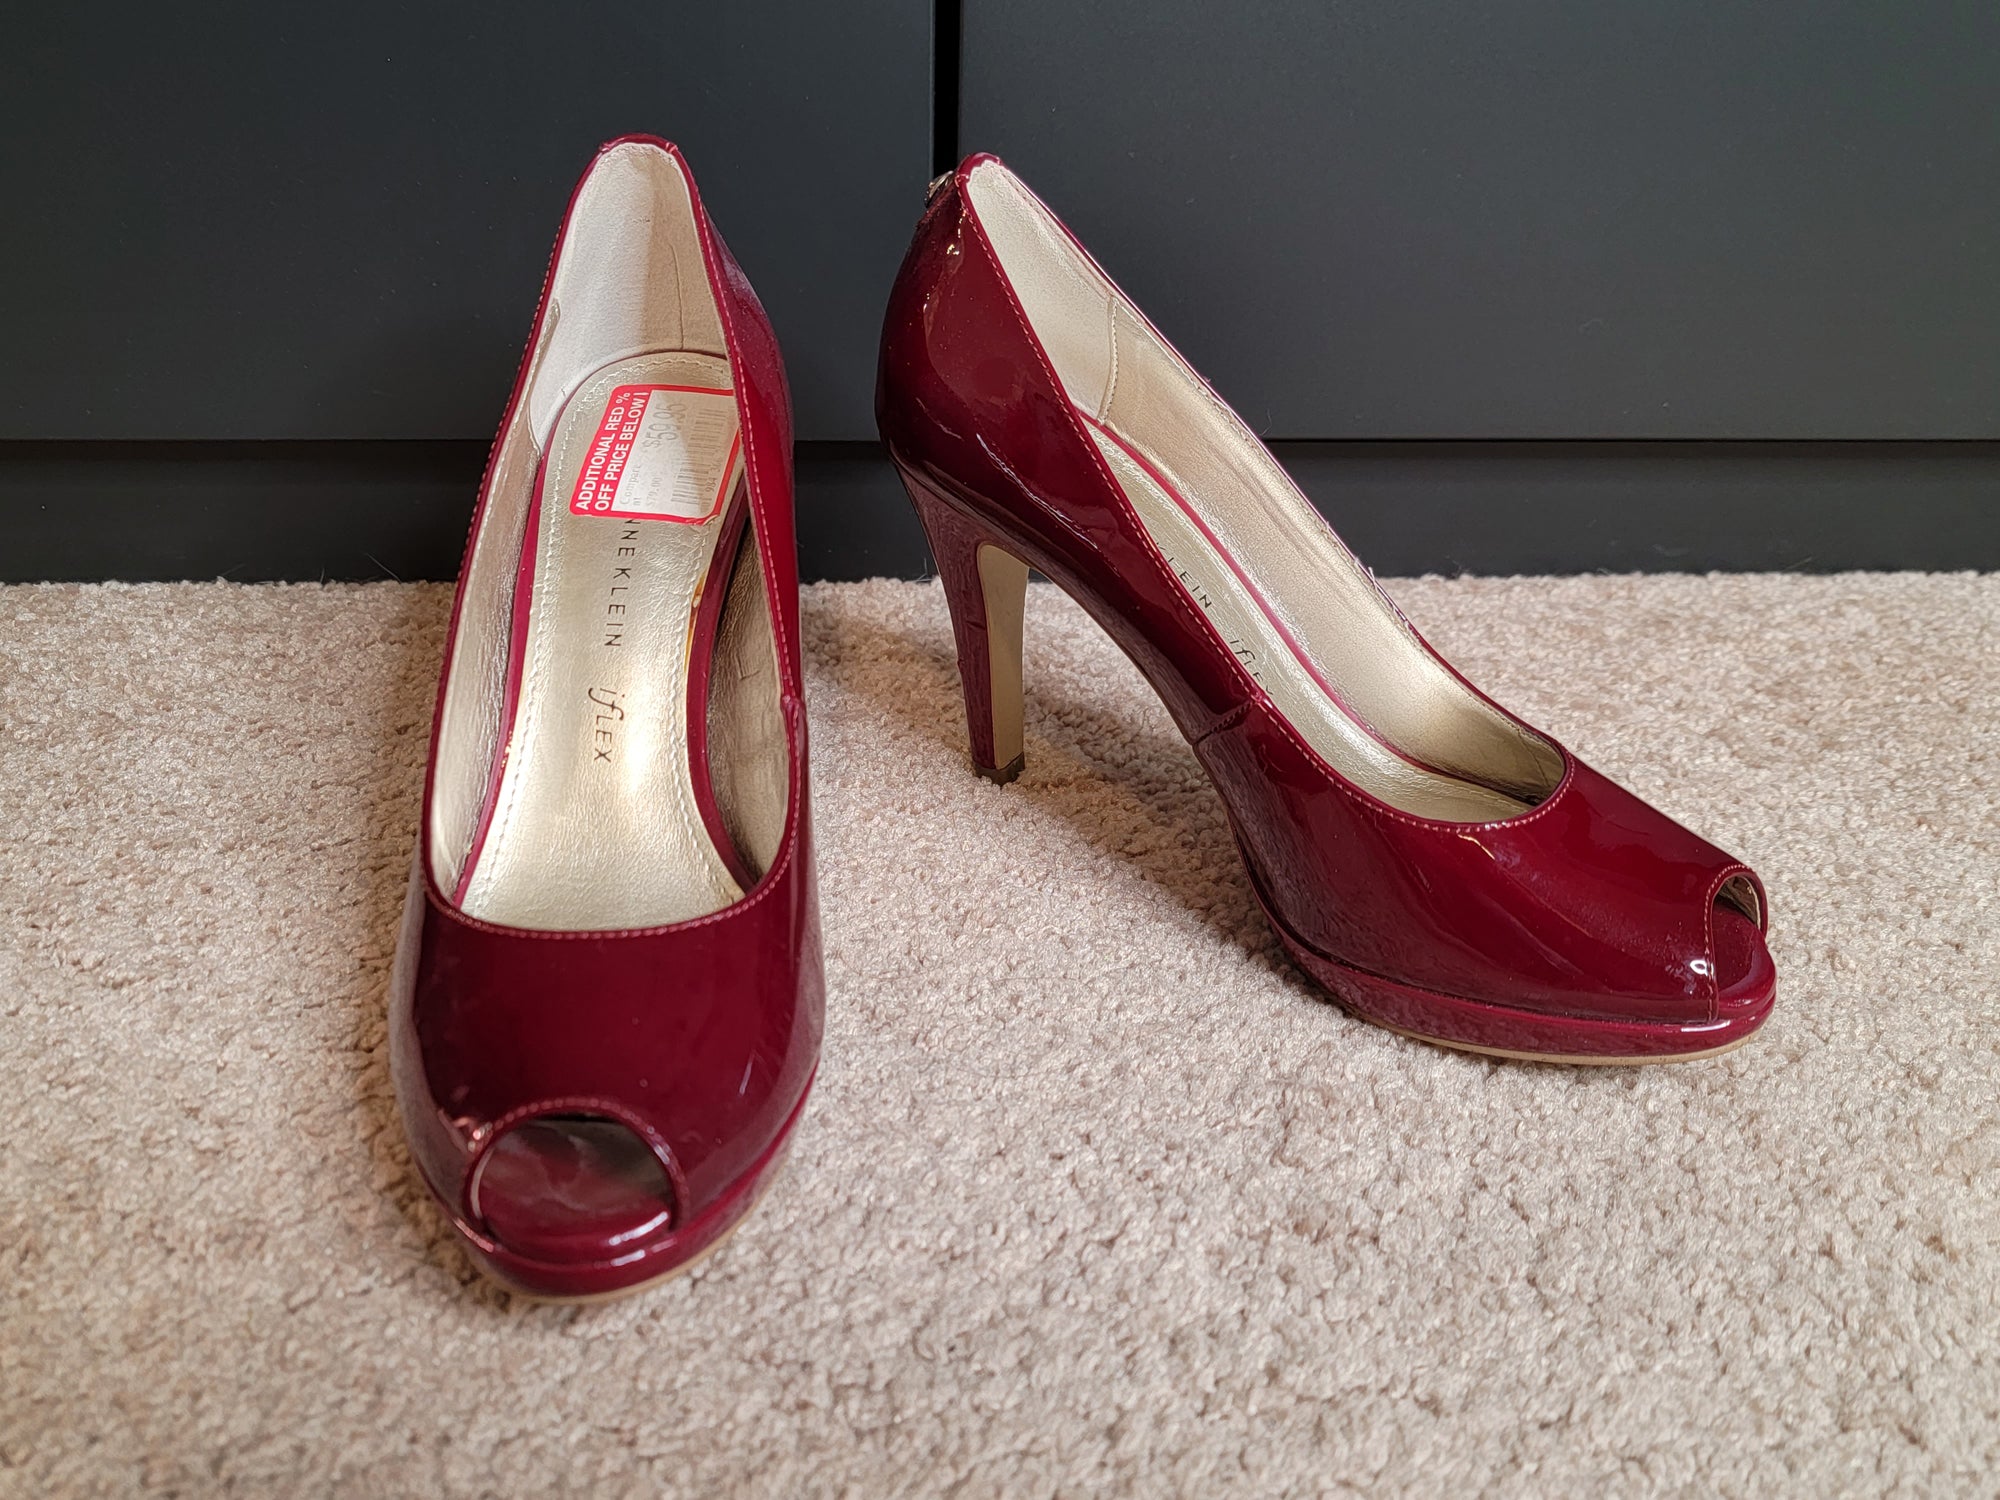 Red Patent Leather Pumps